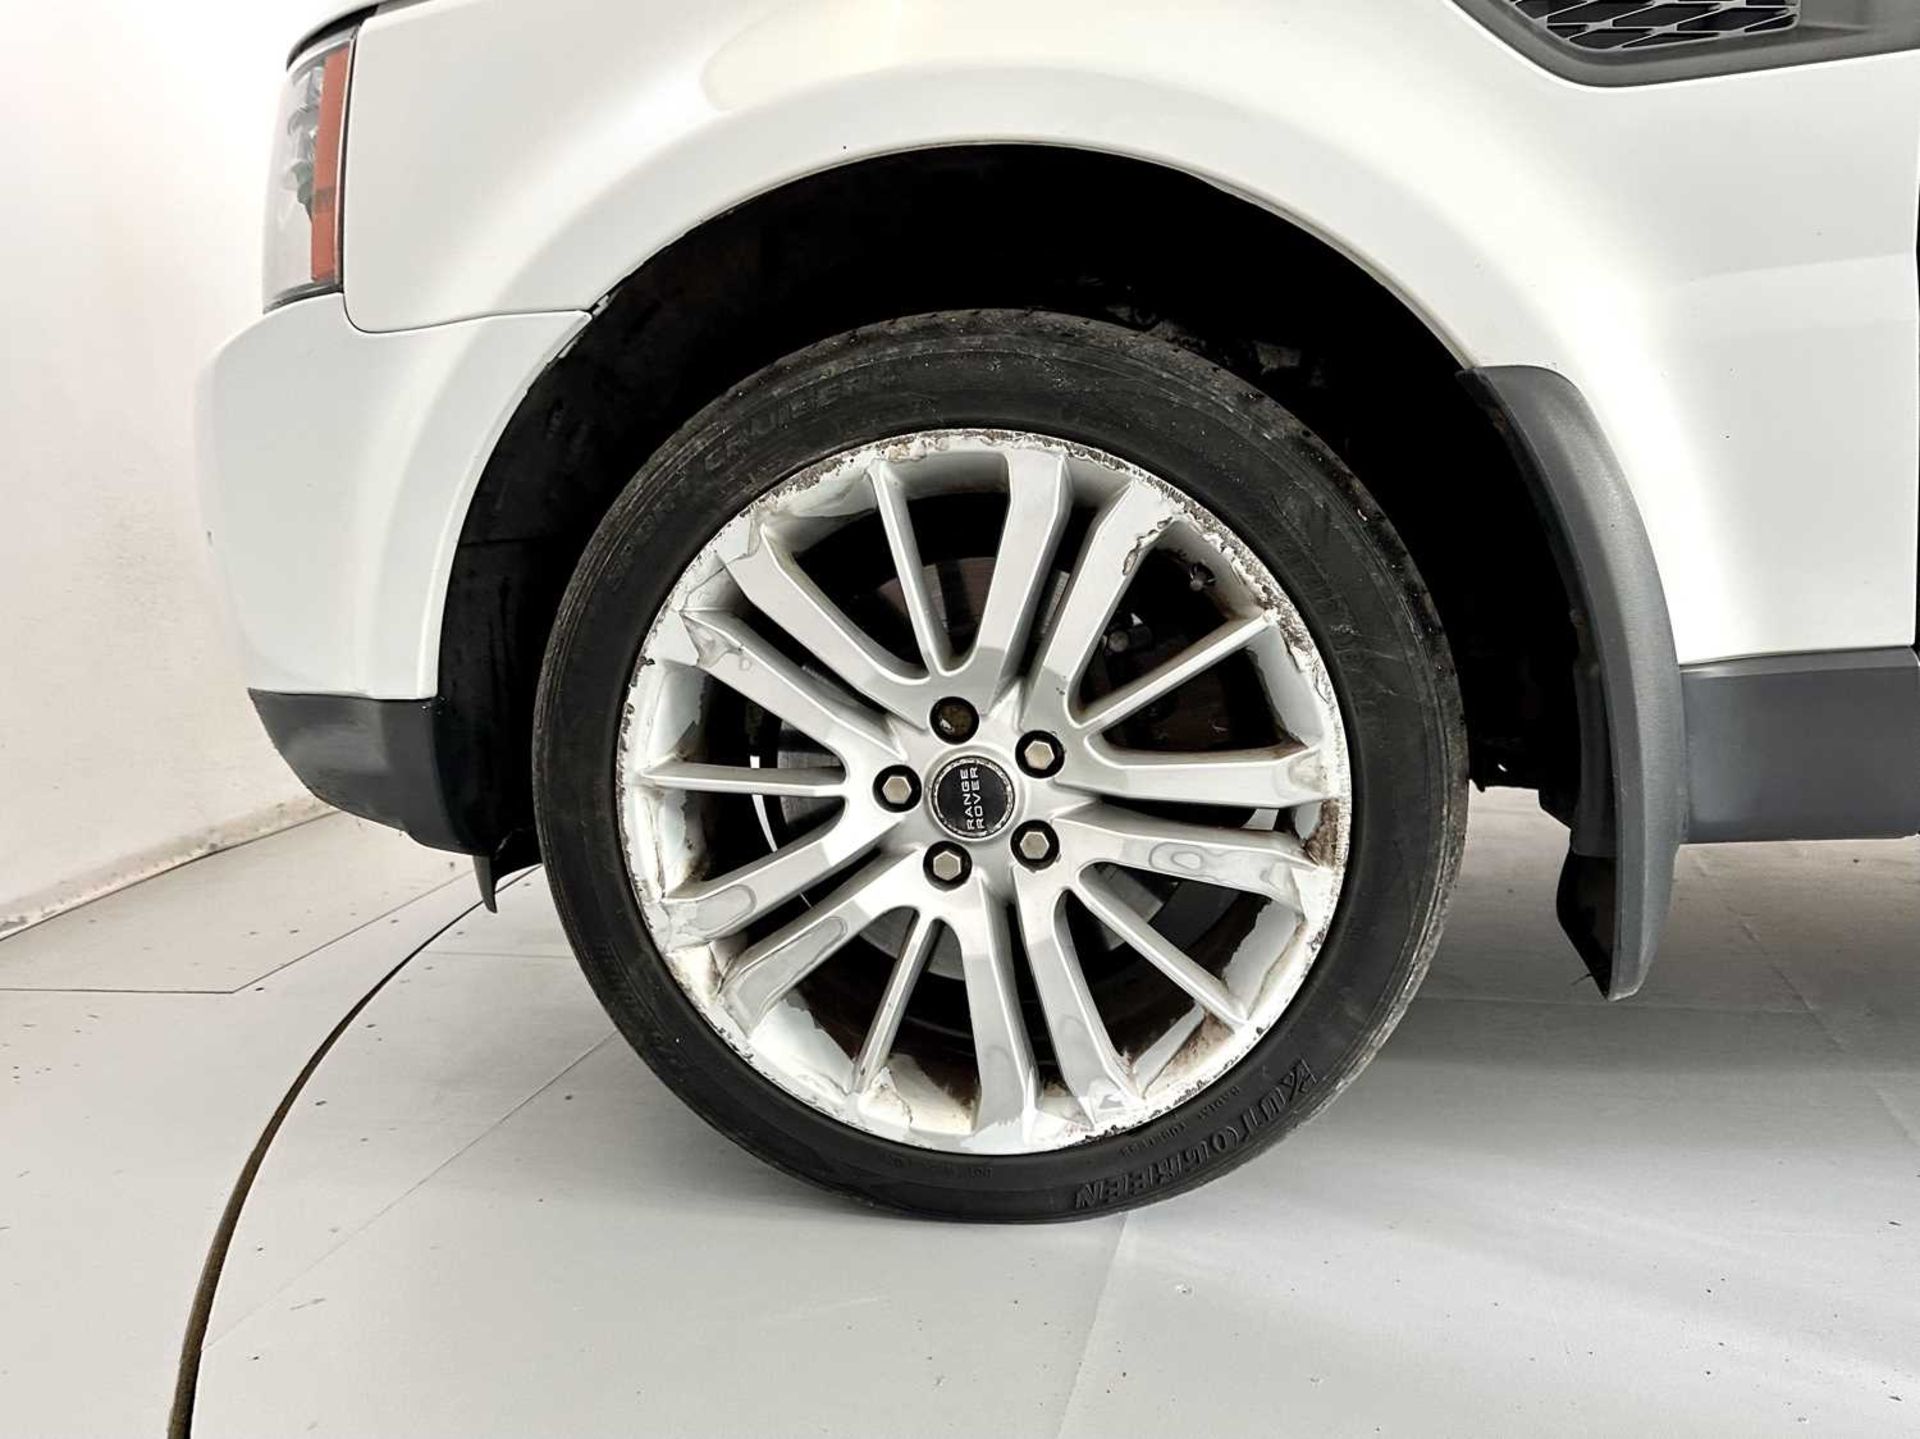 2010 Land Rover Range Rover Sport - Image 15 of 34